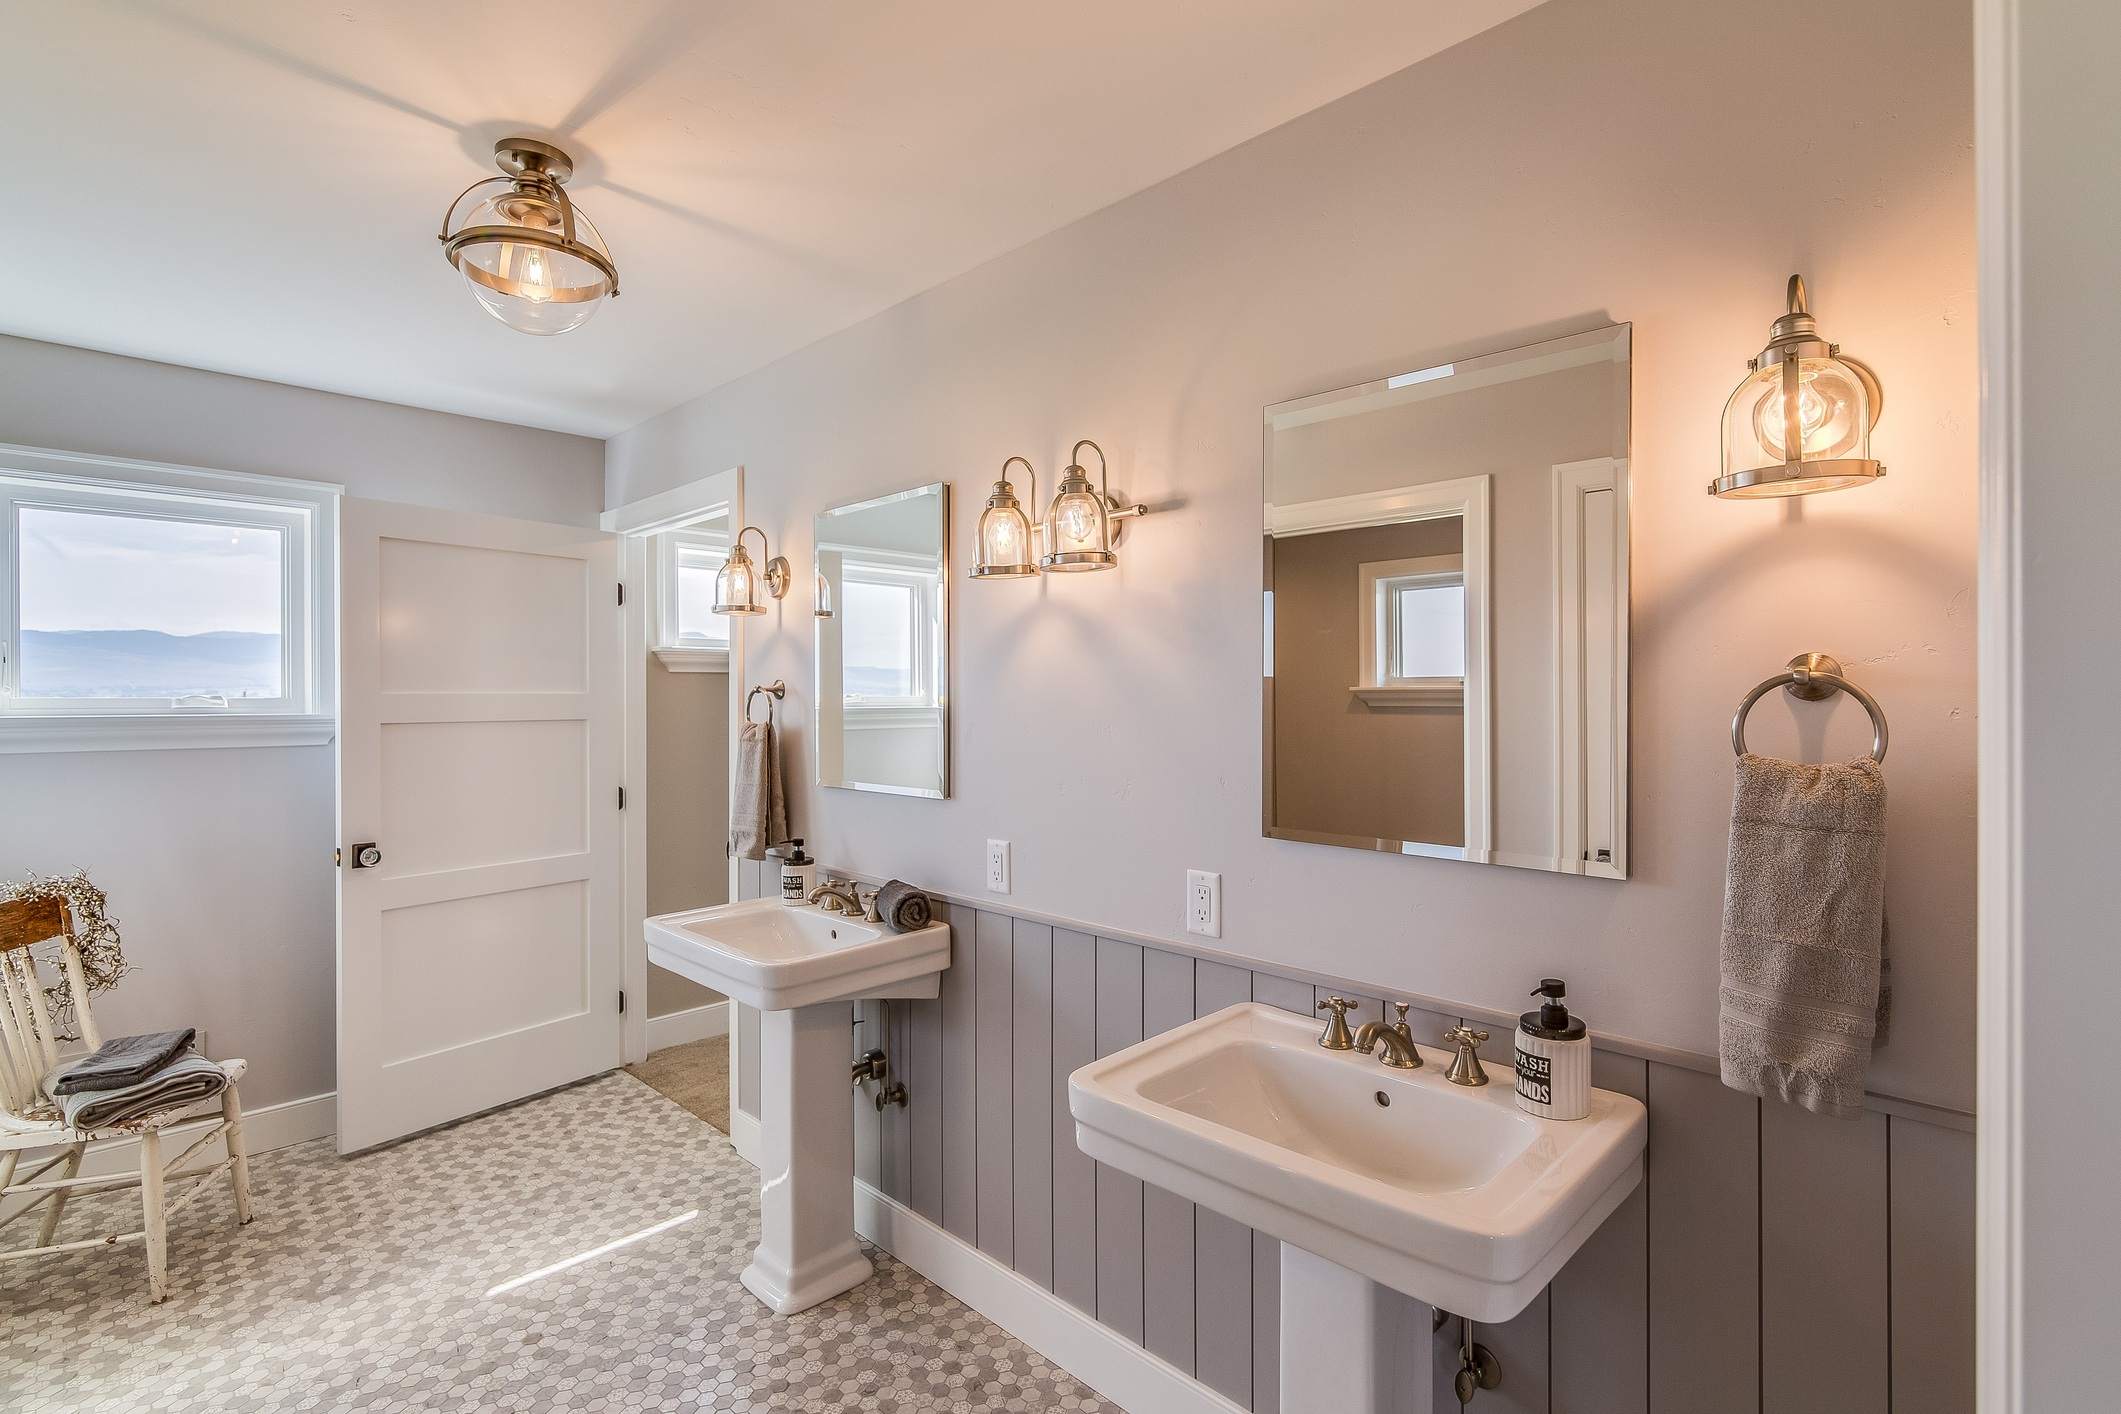 Double pedestal sinks in renovated bathroom with soft pink walls.